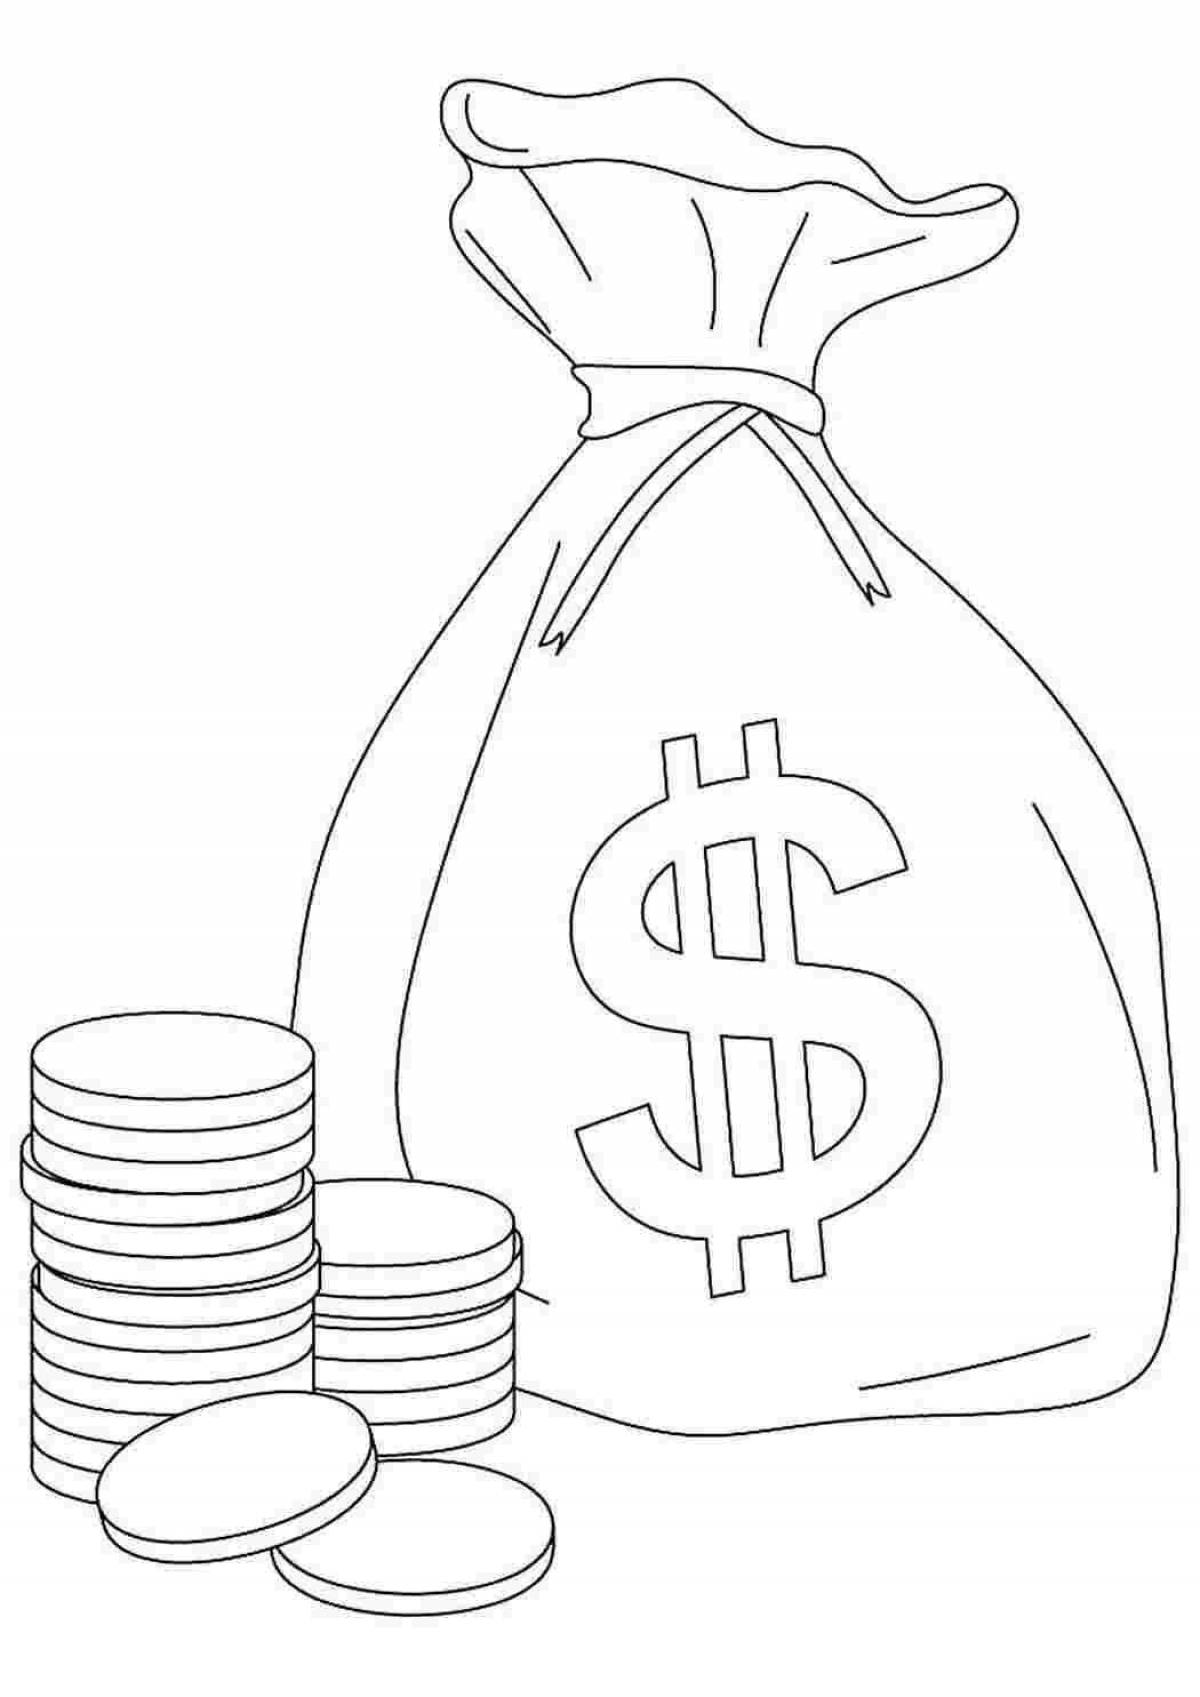 Innovative Family Budget coloring page